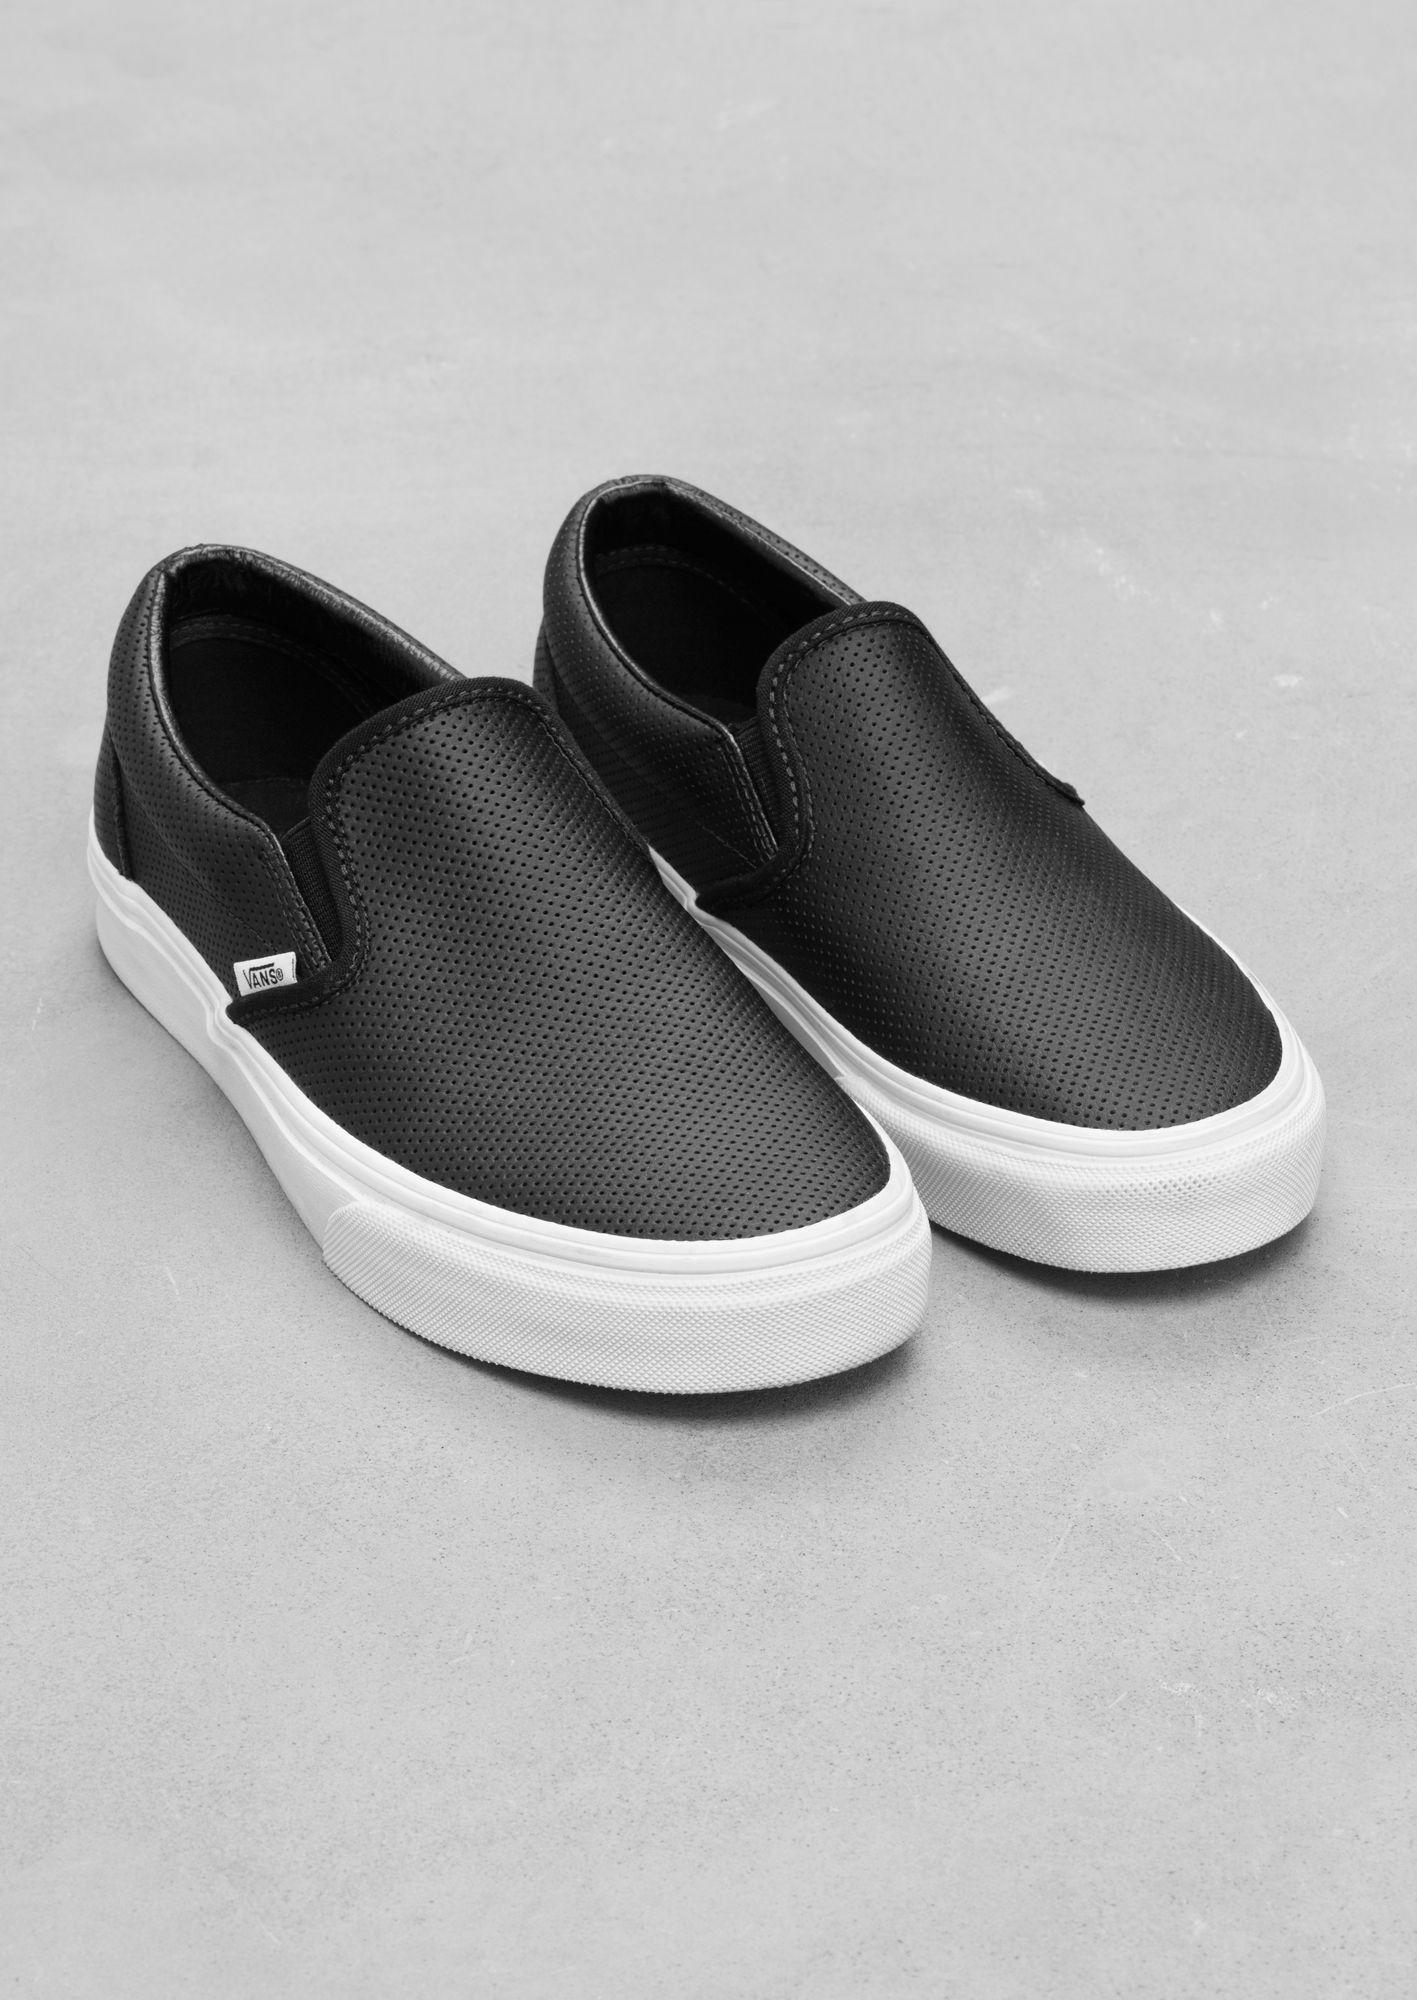 Leather Vans Logo - Perf Leather Slip-On | xmas | Shoes, Sneakers, Slip on